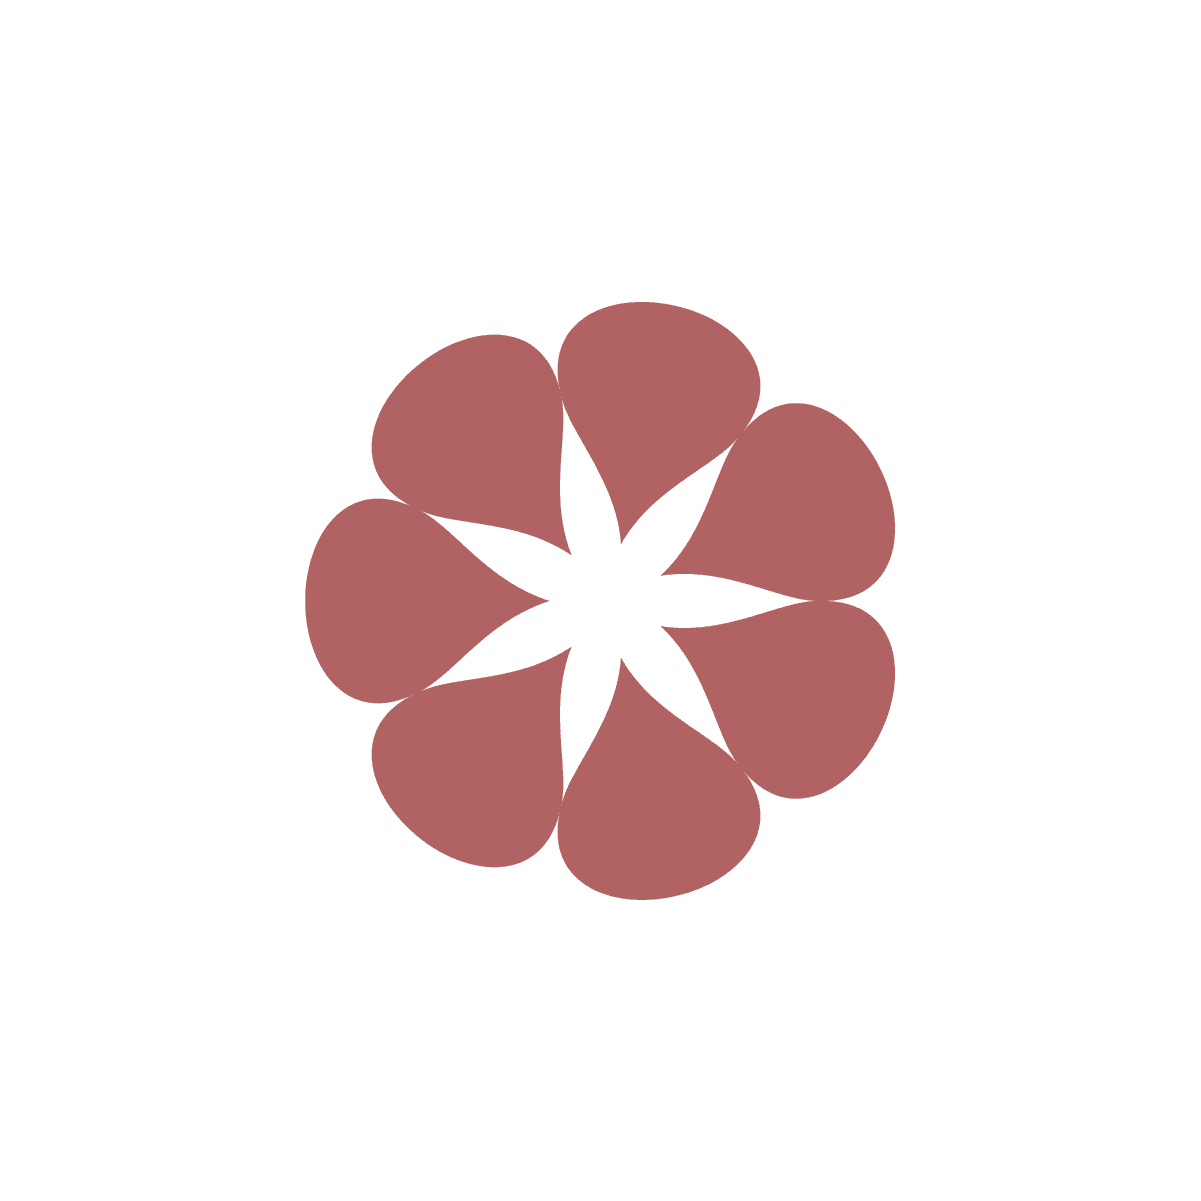 geometric pink flower illustration with many round petals